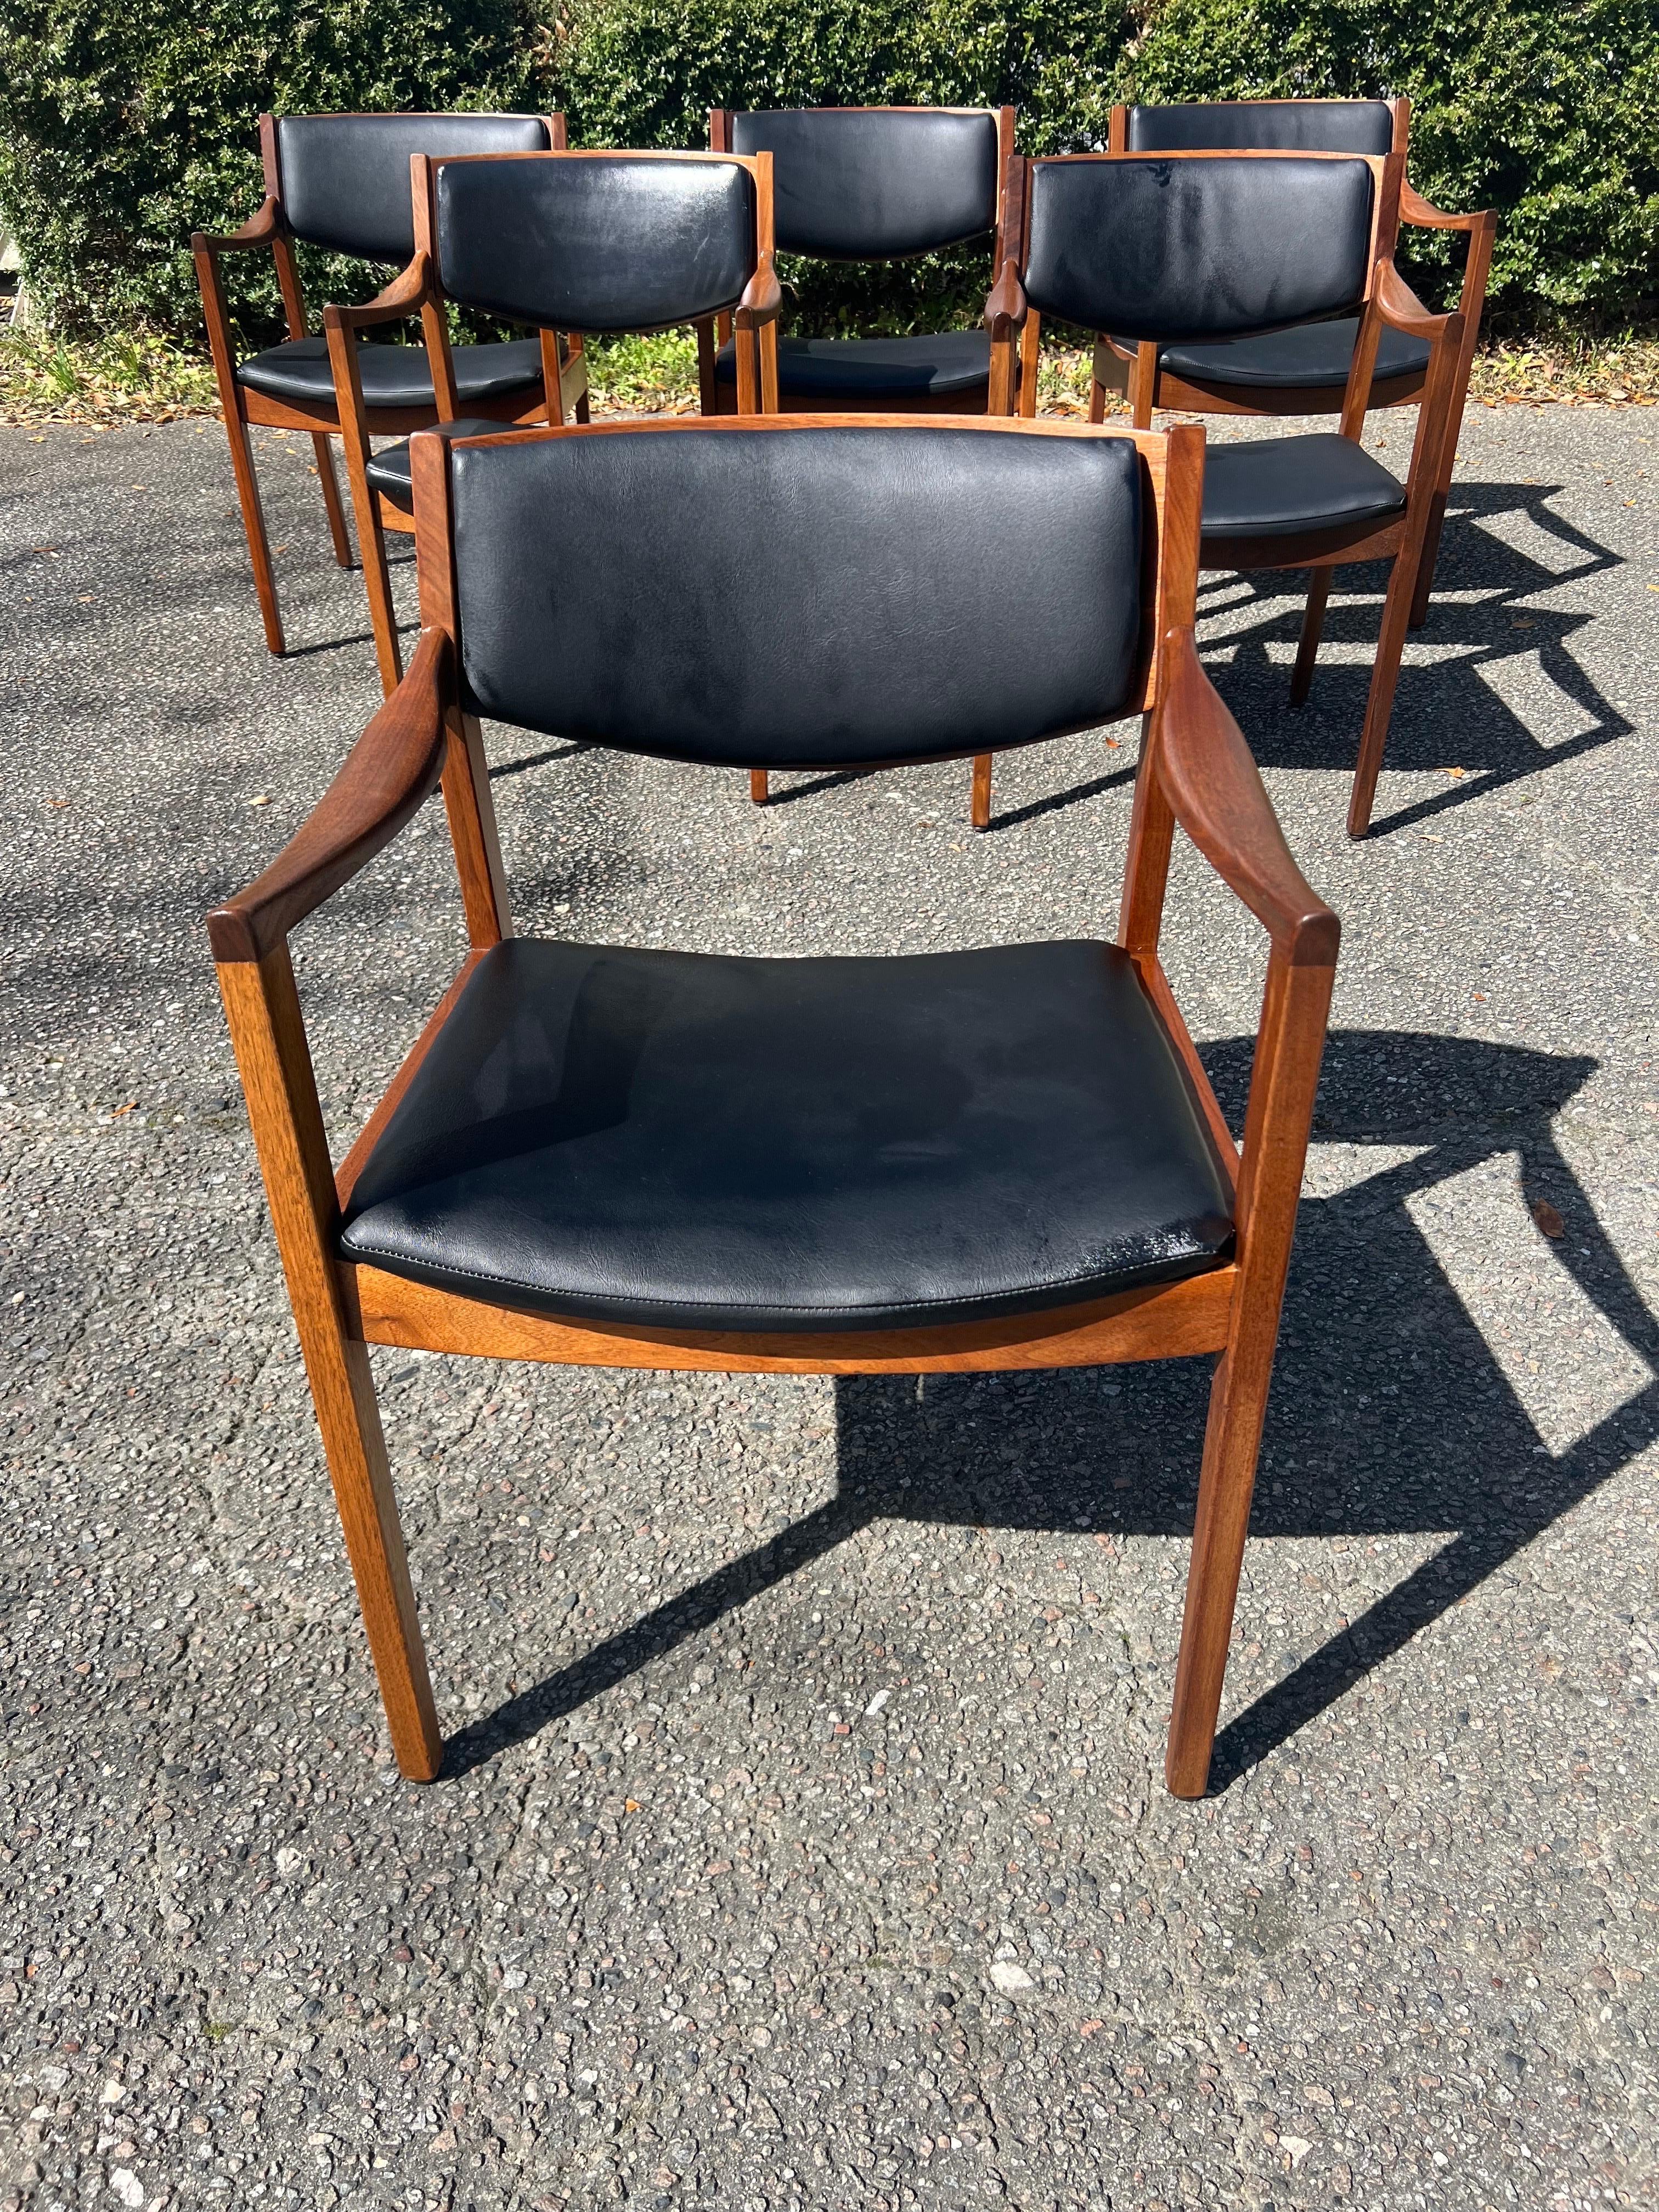 These mid-century modern Gunlocke armchairs feature solid wood construction, sculpted walnut armrests,  and original black vinyl upholstery. With swooped armrests, these beautifully designed accent chairs  are in excellent vintage condition with one